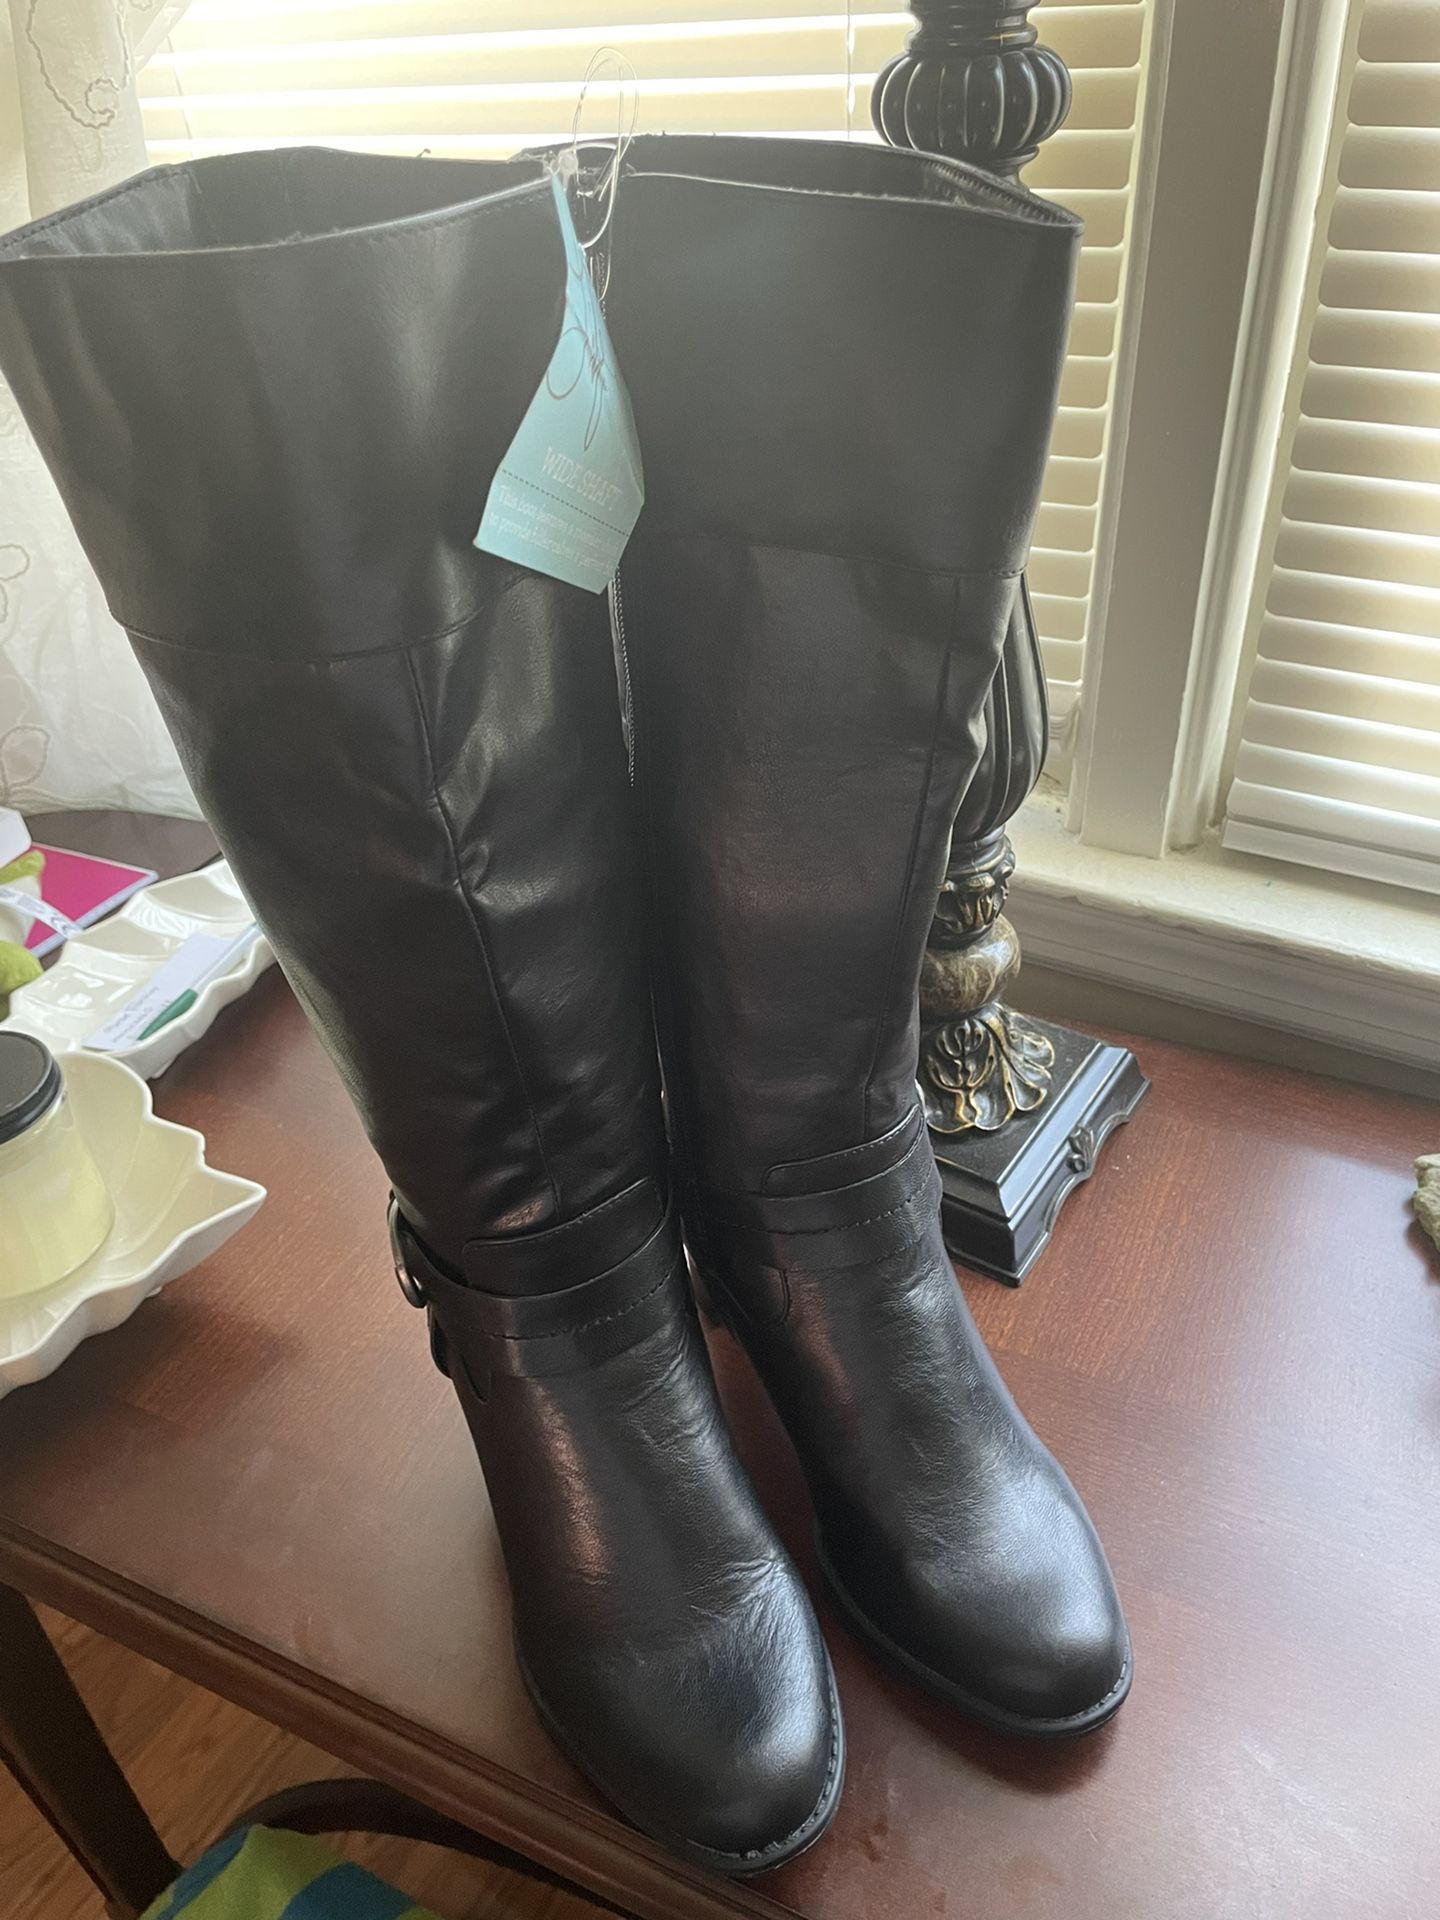 New Life Stride Wide Calf Boots Black Size 8